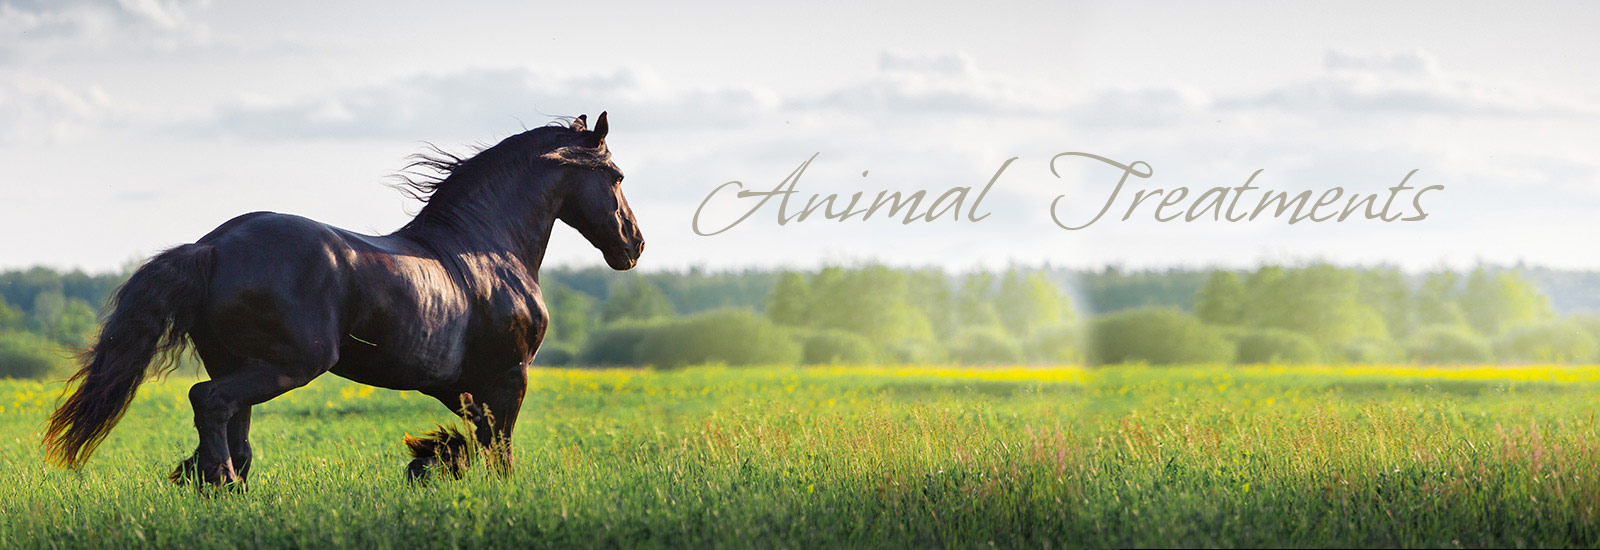 Energy Balancing Energy Healing for Animals Horses and Humans